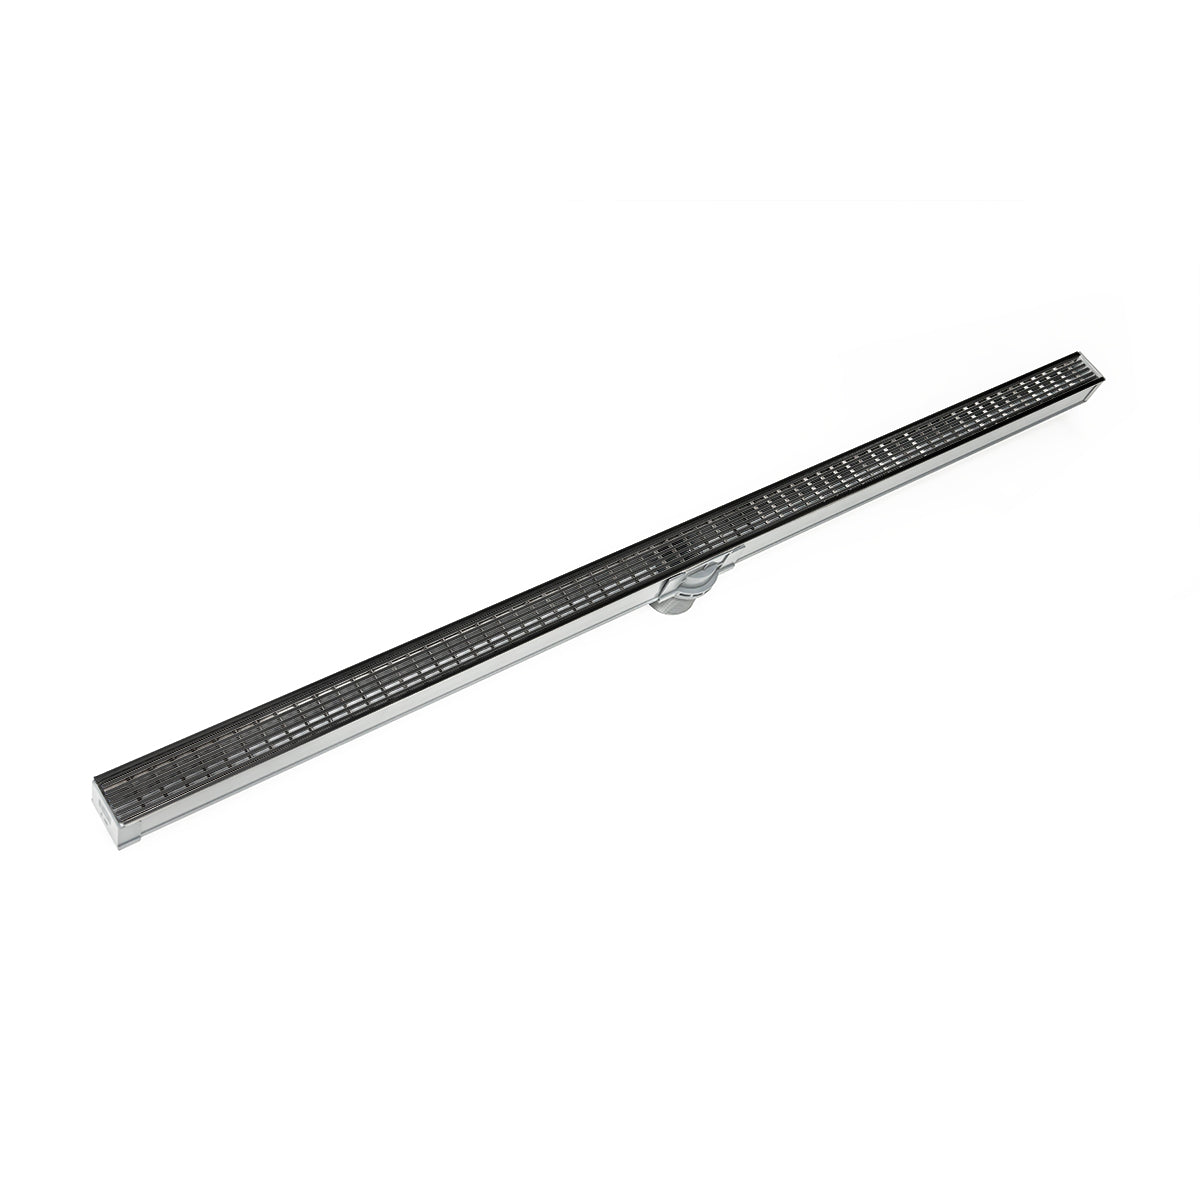 Infinity Drain 36" S-PVC Series Site Sizable Linear Drain Kit with 1 1/2" Wedge Wire Grate